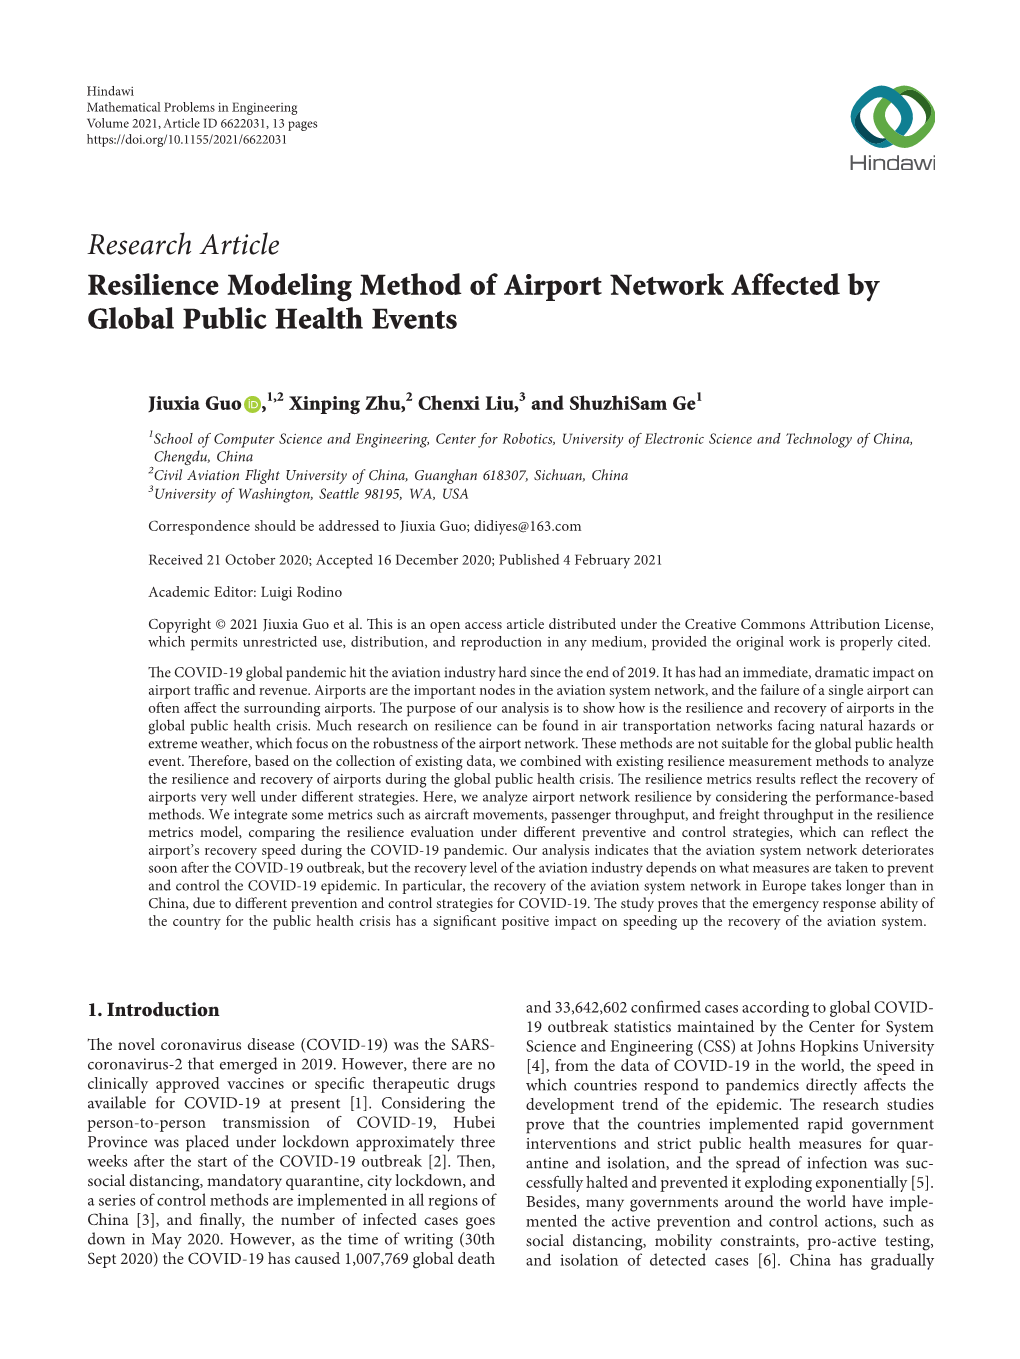 Resilience Modeling Method of Airport Network Affected by Global Public Health Events